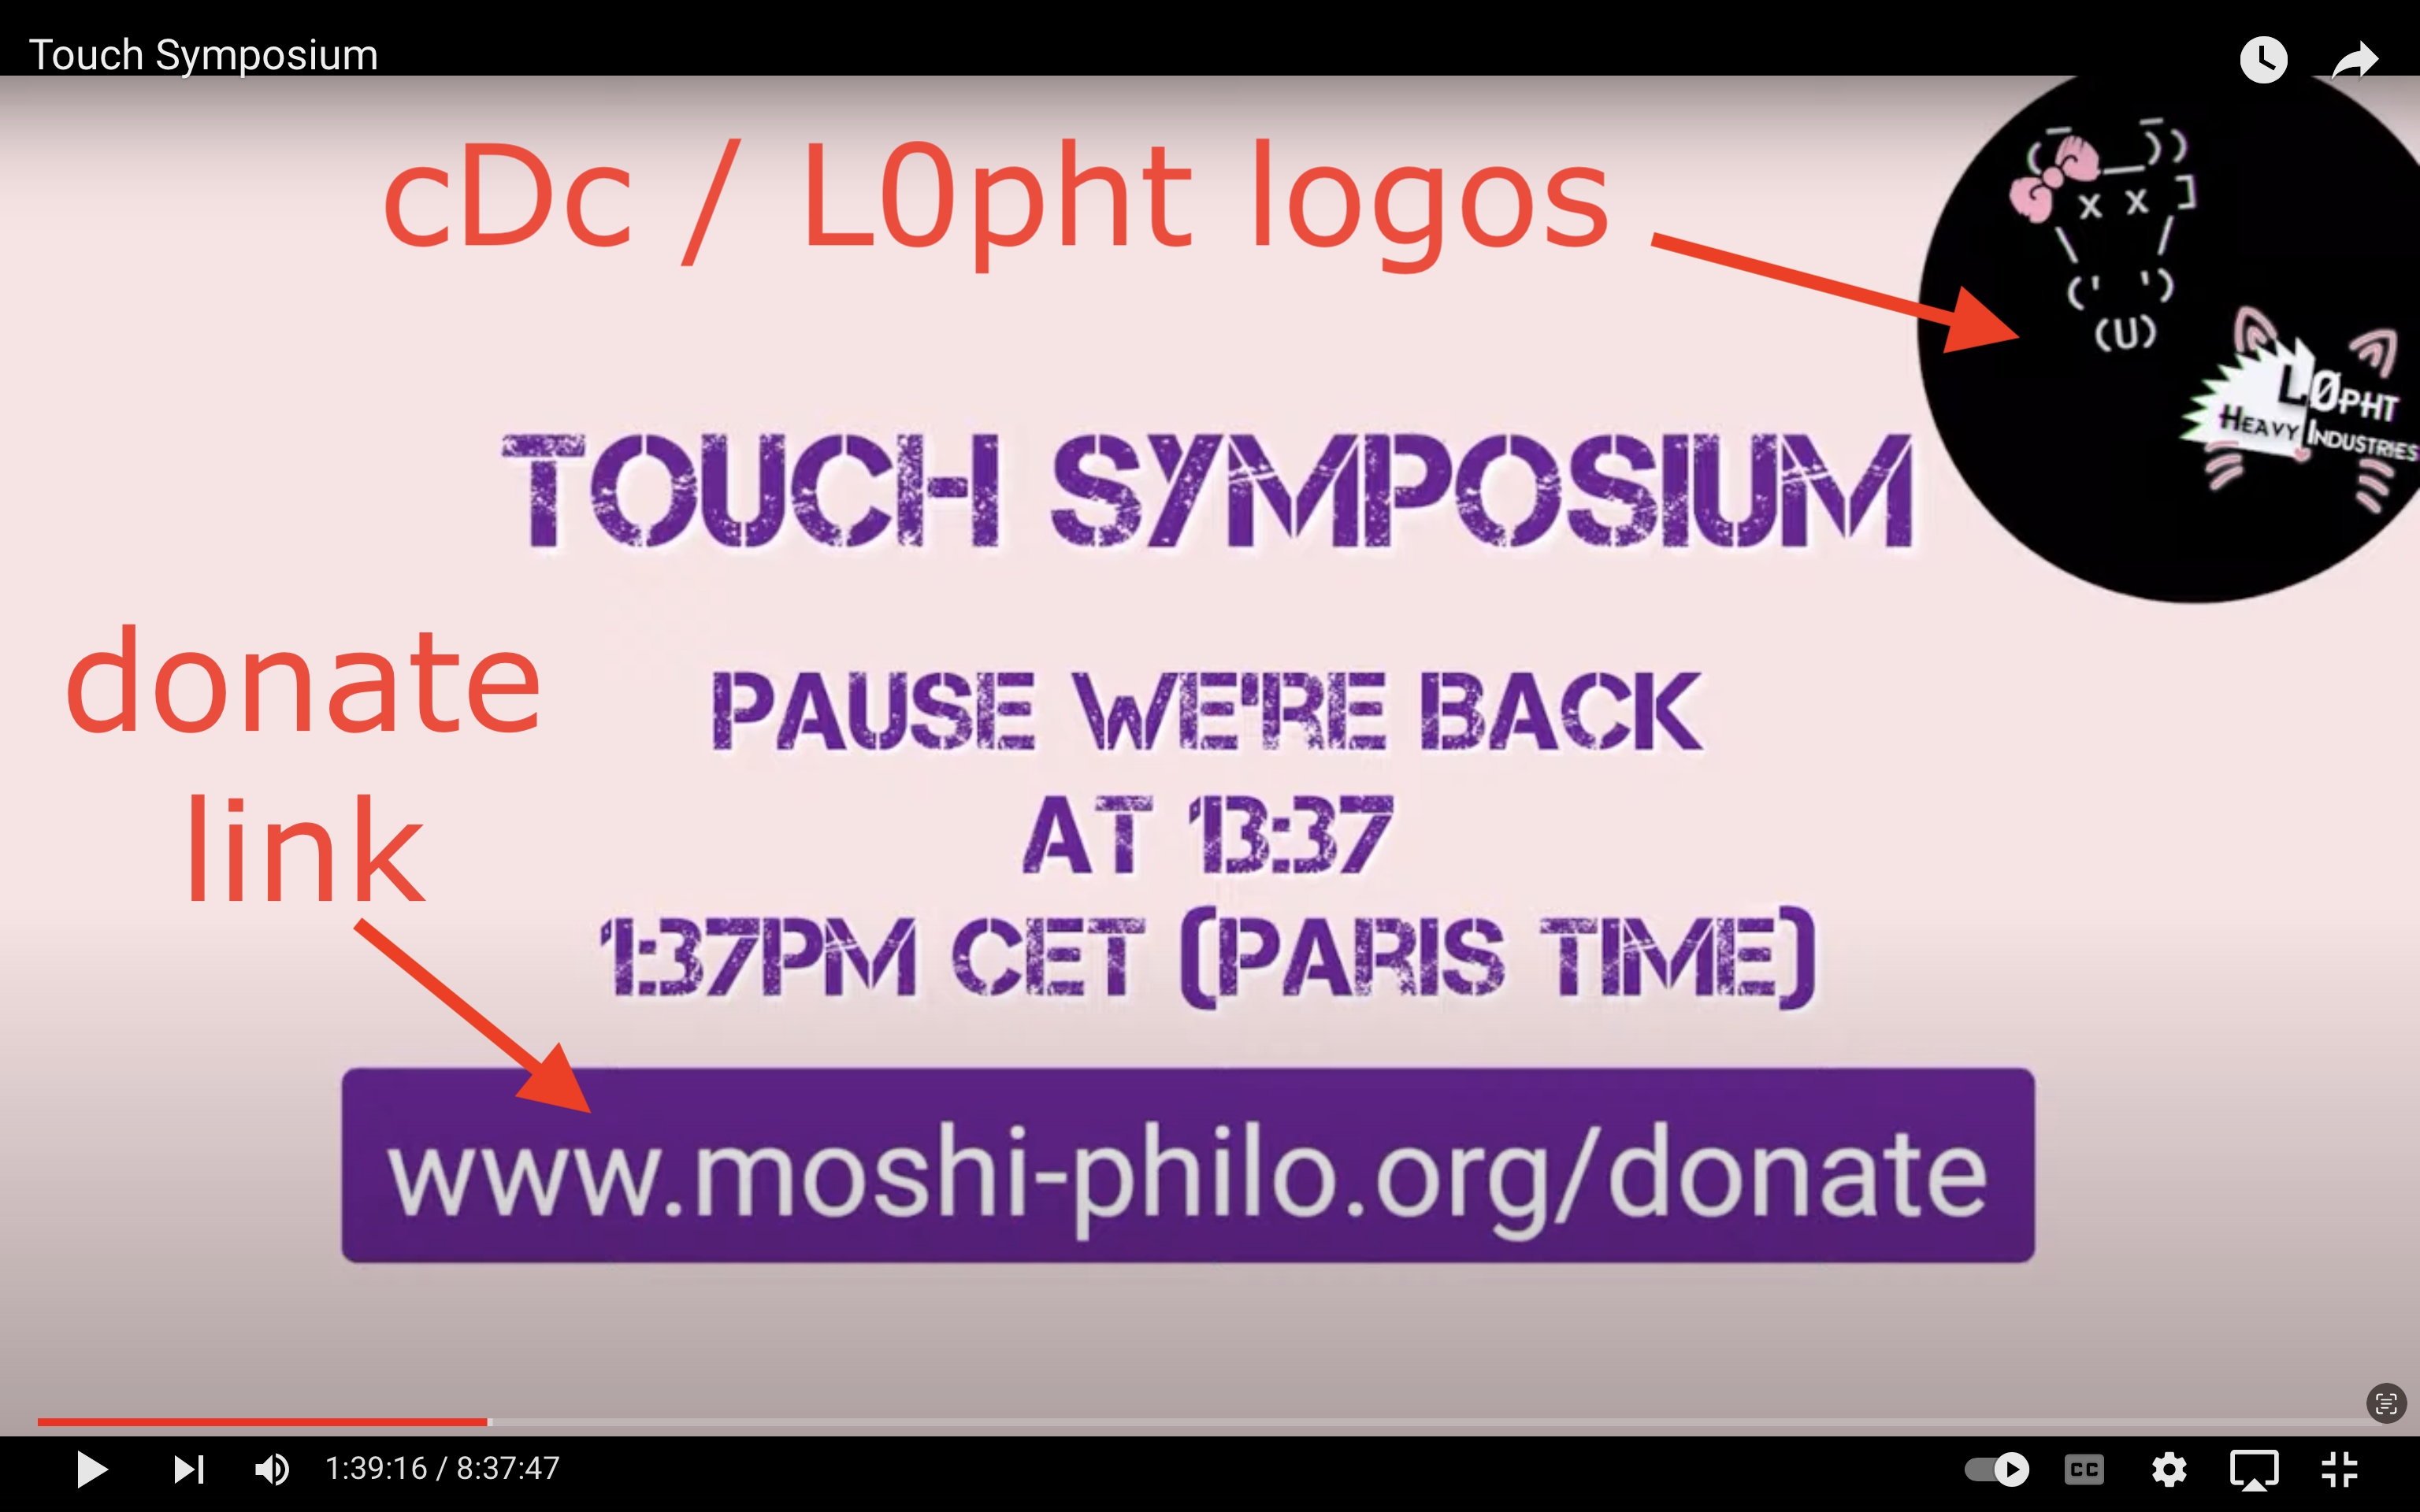 A full-screen slide consisting primarily of purple text on a pink background. Inside the circle in the upper right corner is the cDc ASCII cow skull logo adorned with a pink 'Hello Kitty' hair bow, and a L0pht Heavy Industries logo with pink cat ears, whiskers, and nose. In the middle of the slide is the text: 'TOUCH SYMPOSIUM | PAUSE WE'RE BACK | AT 13:37 | 1:37PM CET (PARIS TIME) | www.moshi-philo.org/donate'